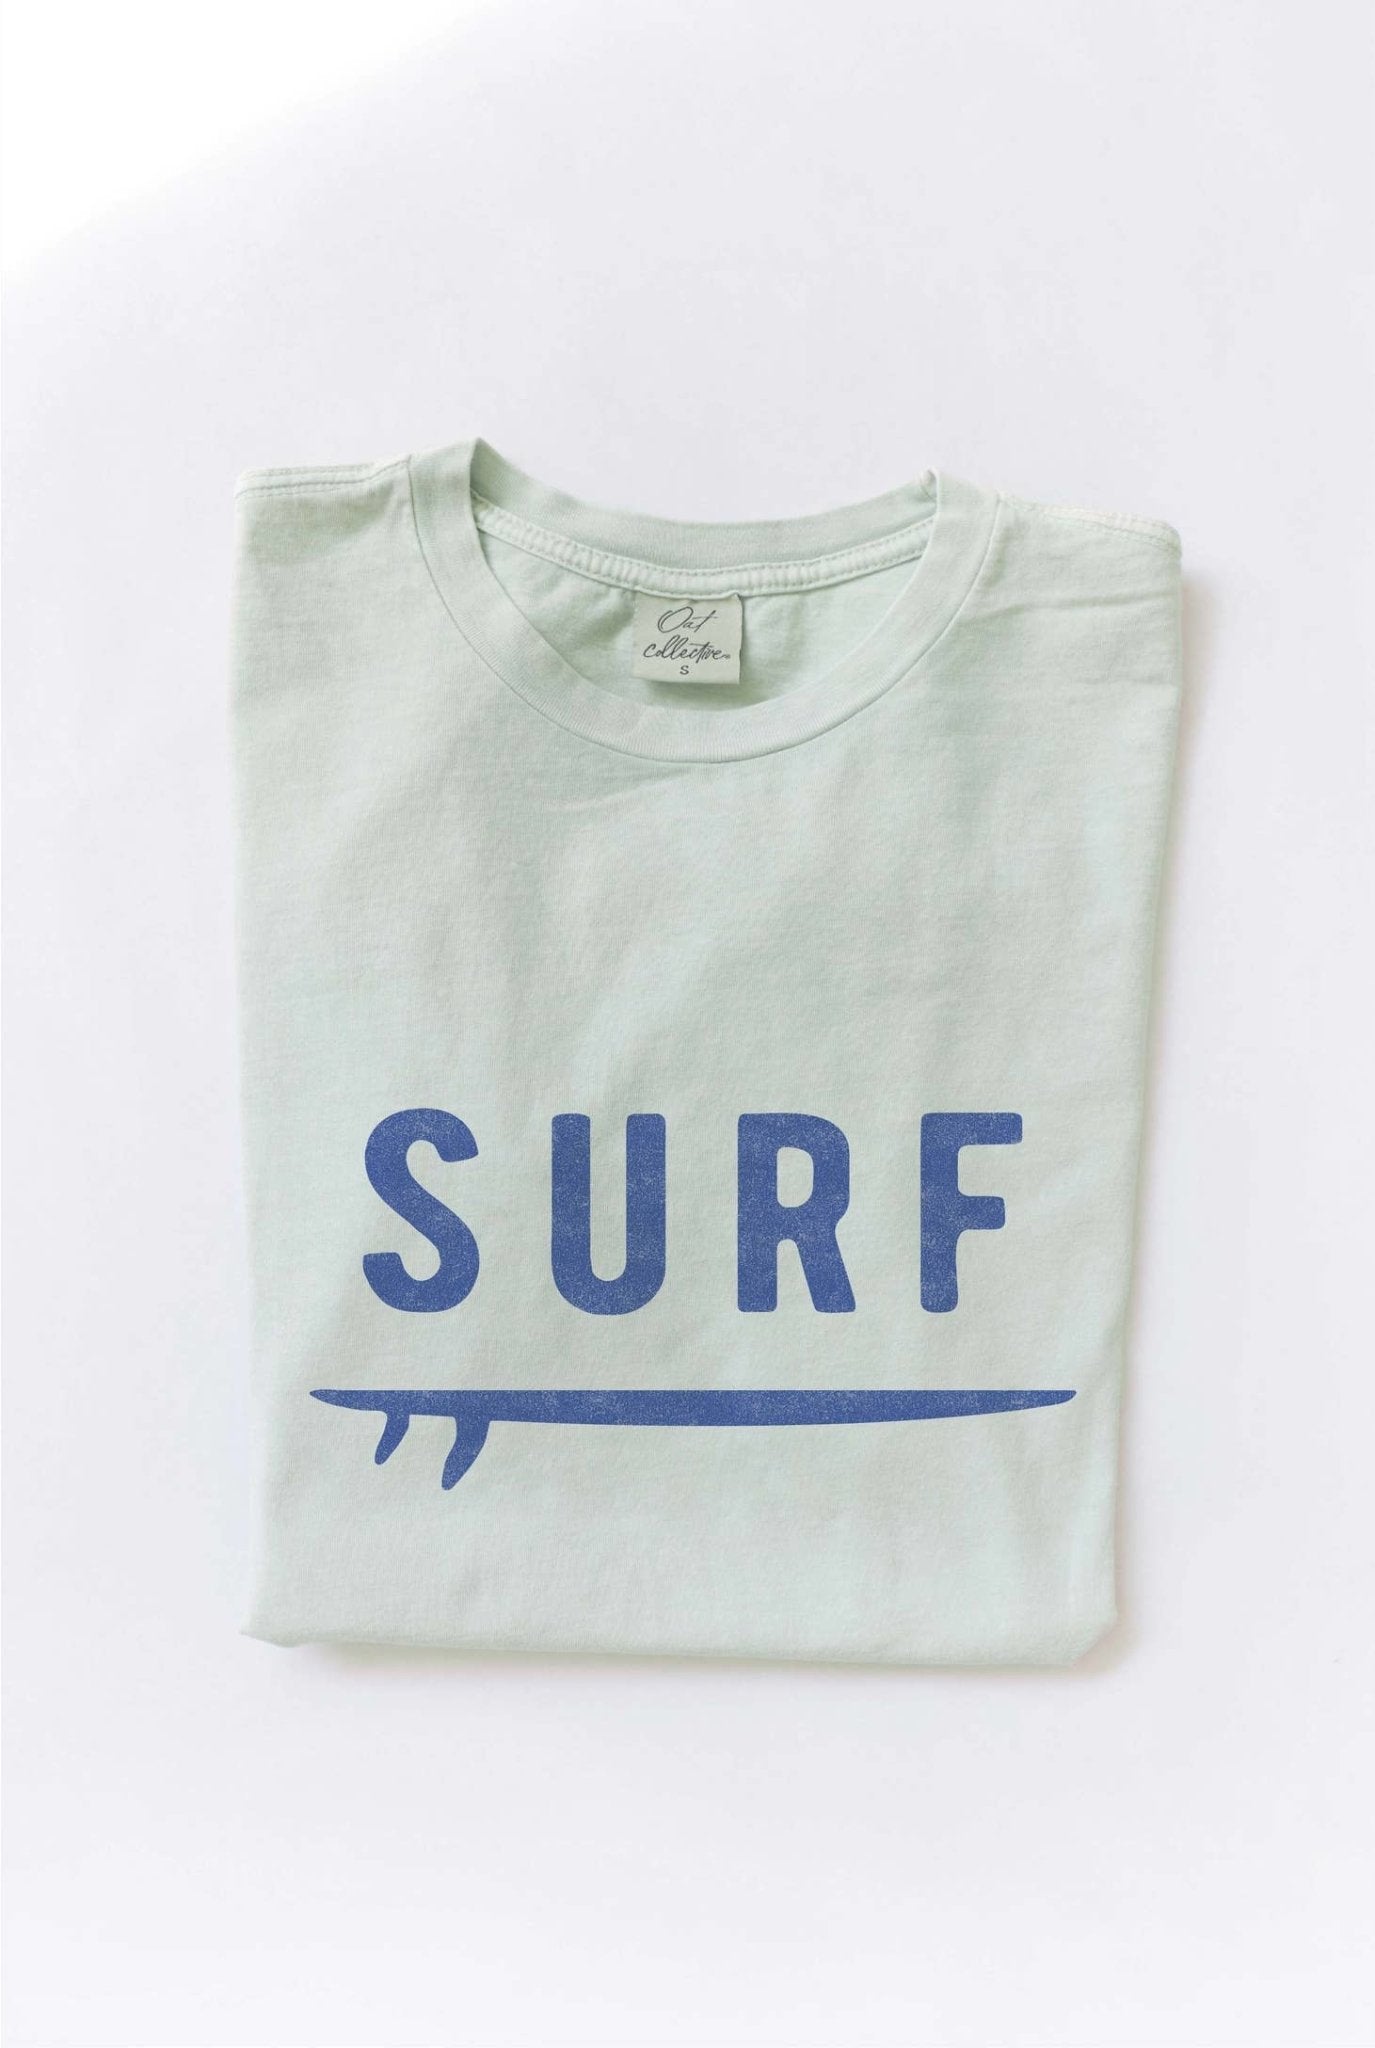 SURF Graphic T-Shirt - The Riviera Towel Company